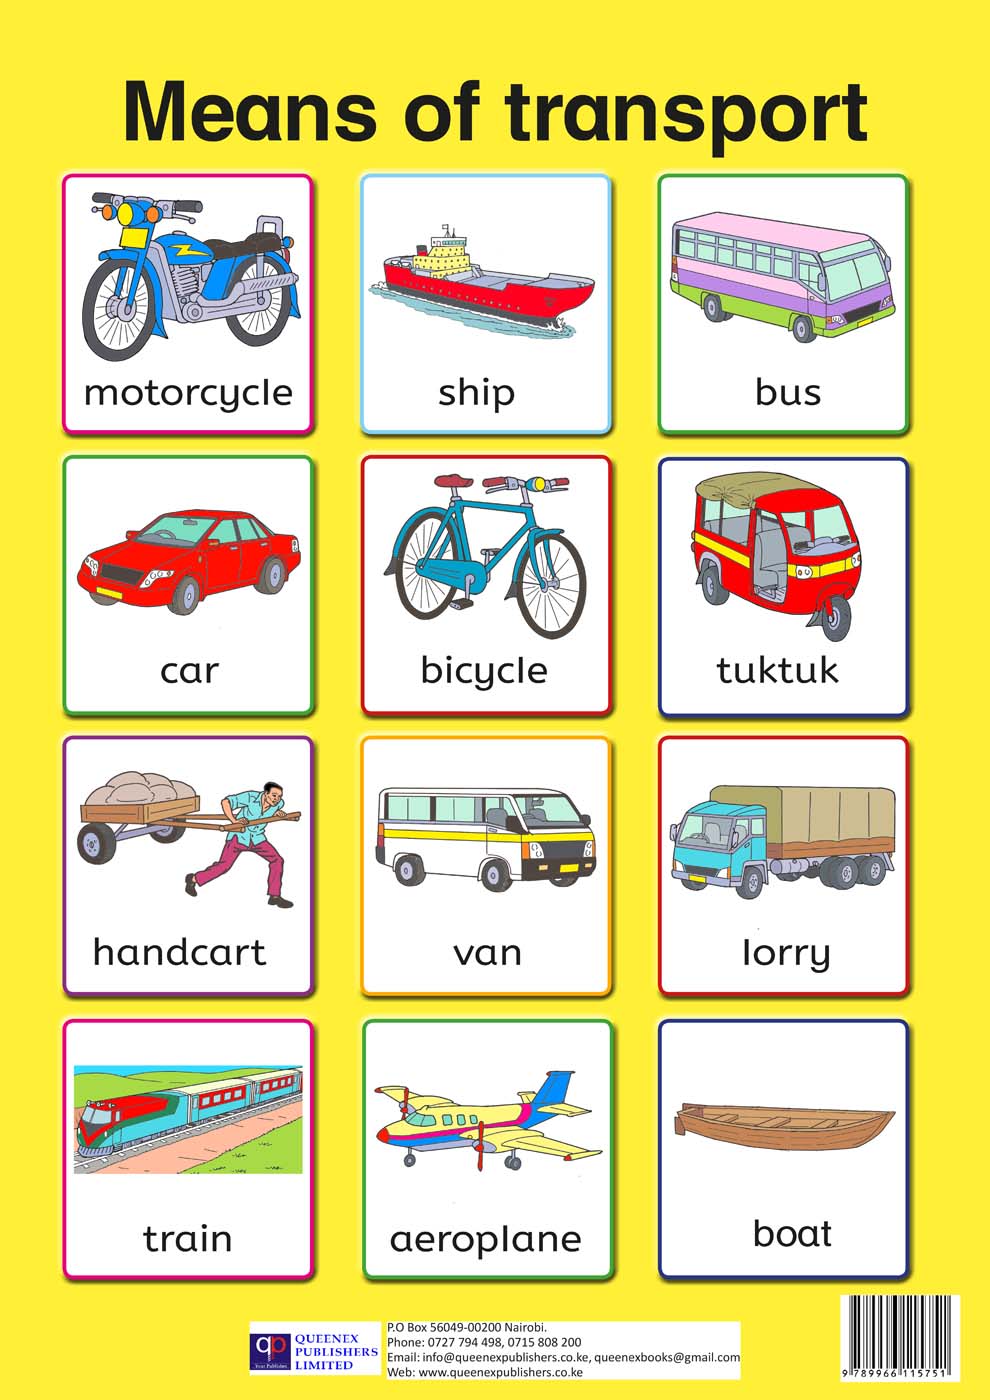 Transport Chart For Classroom